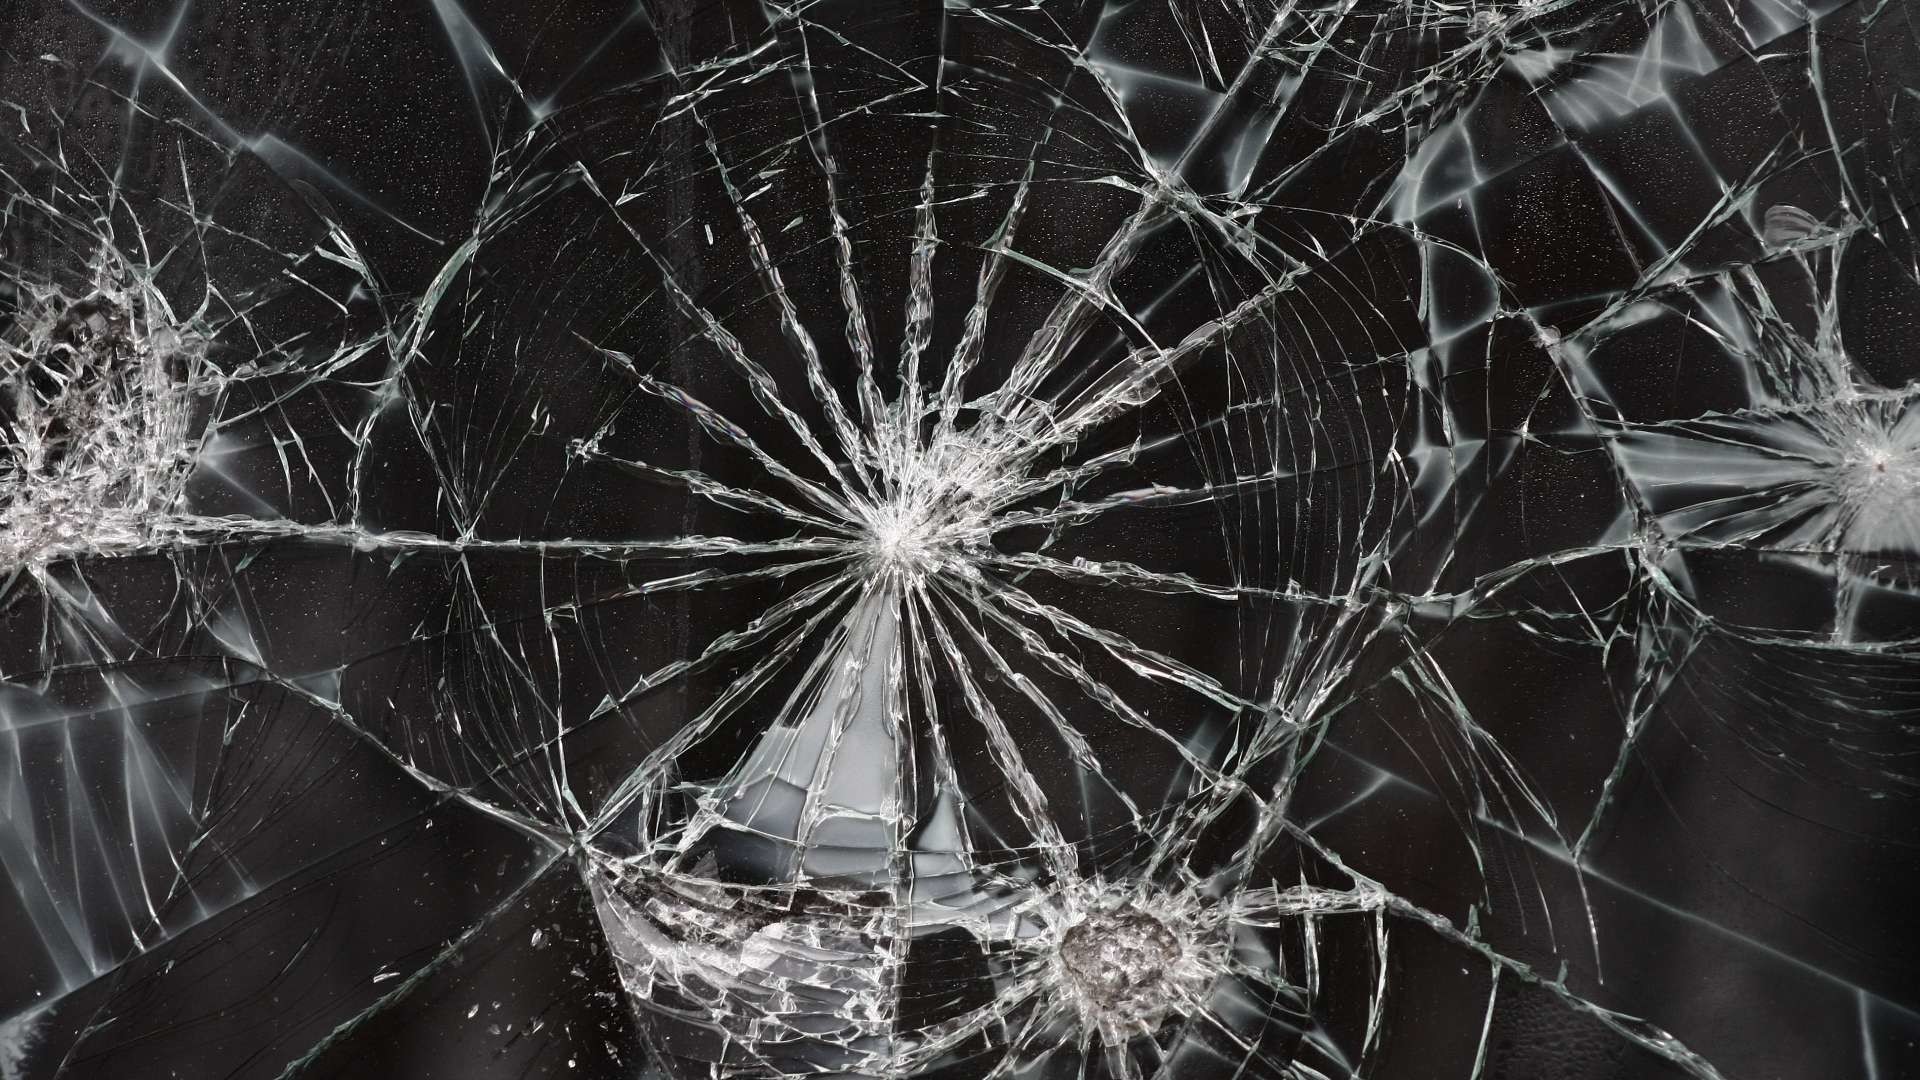 Re Wallpapers Of Cracked Phone Screen You Ca Use To Prank Someone by Joel3m 329pm On Sep 26, 2016